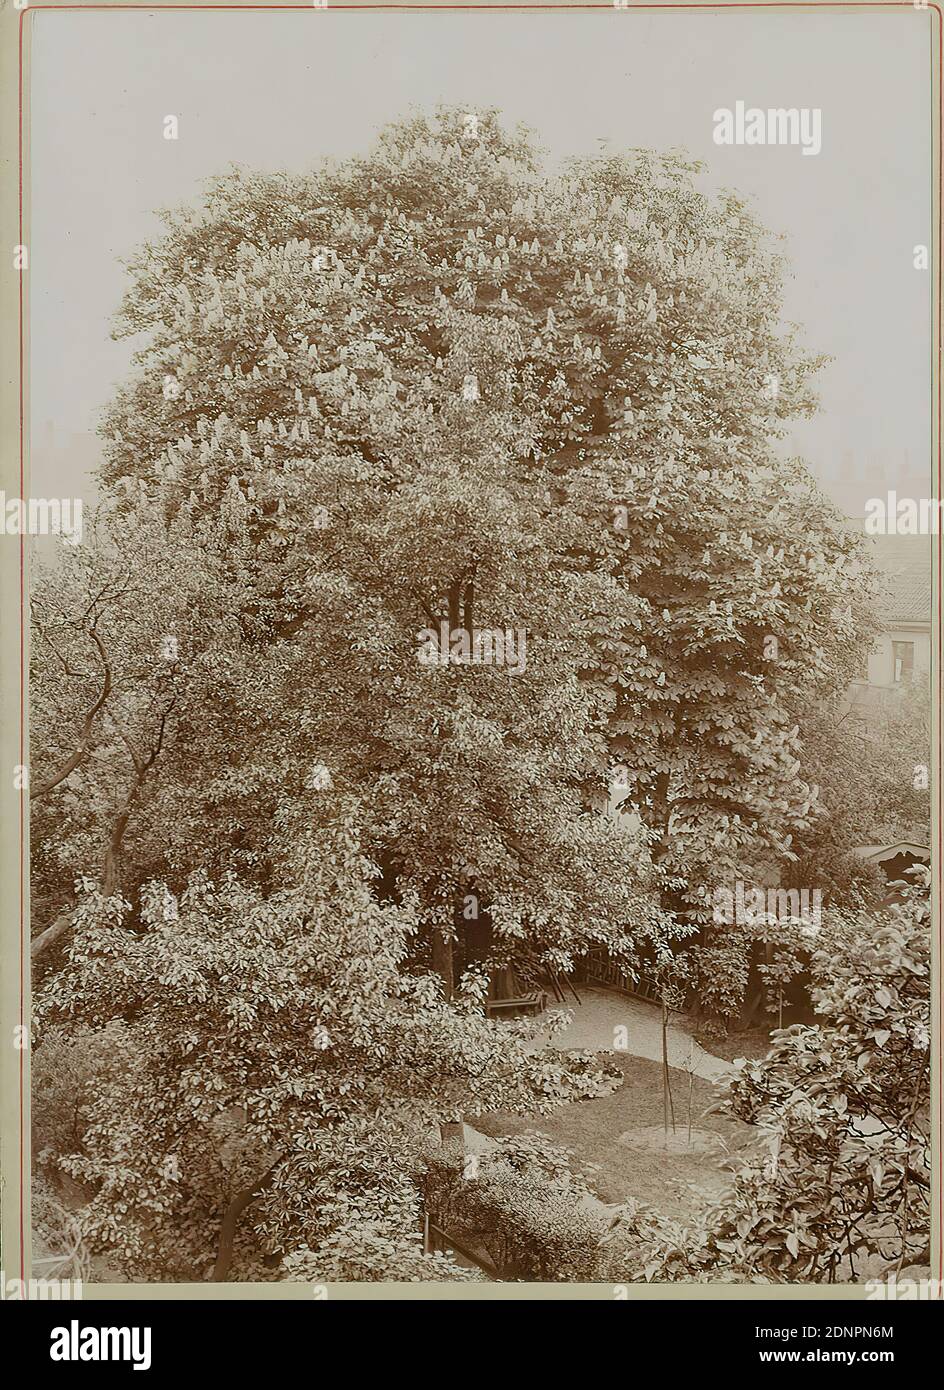 Wilhelm Weimar, chestnut tree in Brockes garden at the broom bindery, albumin paper, black and white positive process, total: height: 18.00 cm; width: 13.00 cm, verso: in lead: Wilhelm Weimar, landscape photography, trees, shrubs, gardens and parks, Hamburg Stock Photo